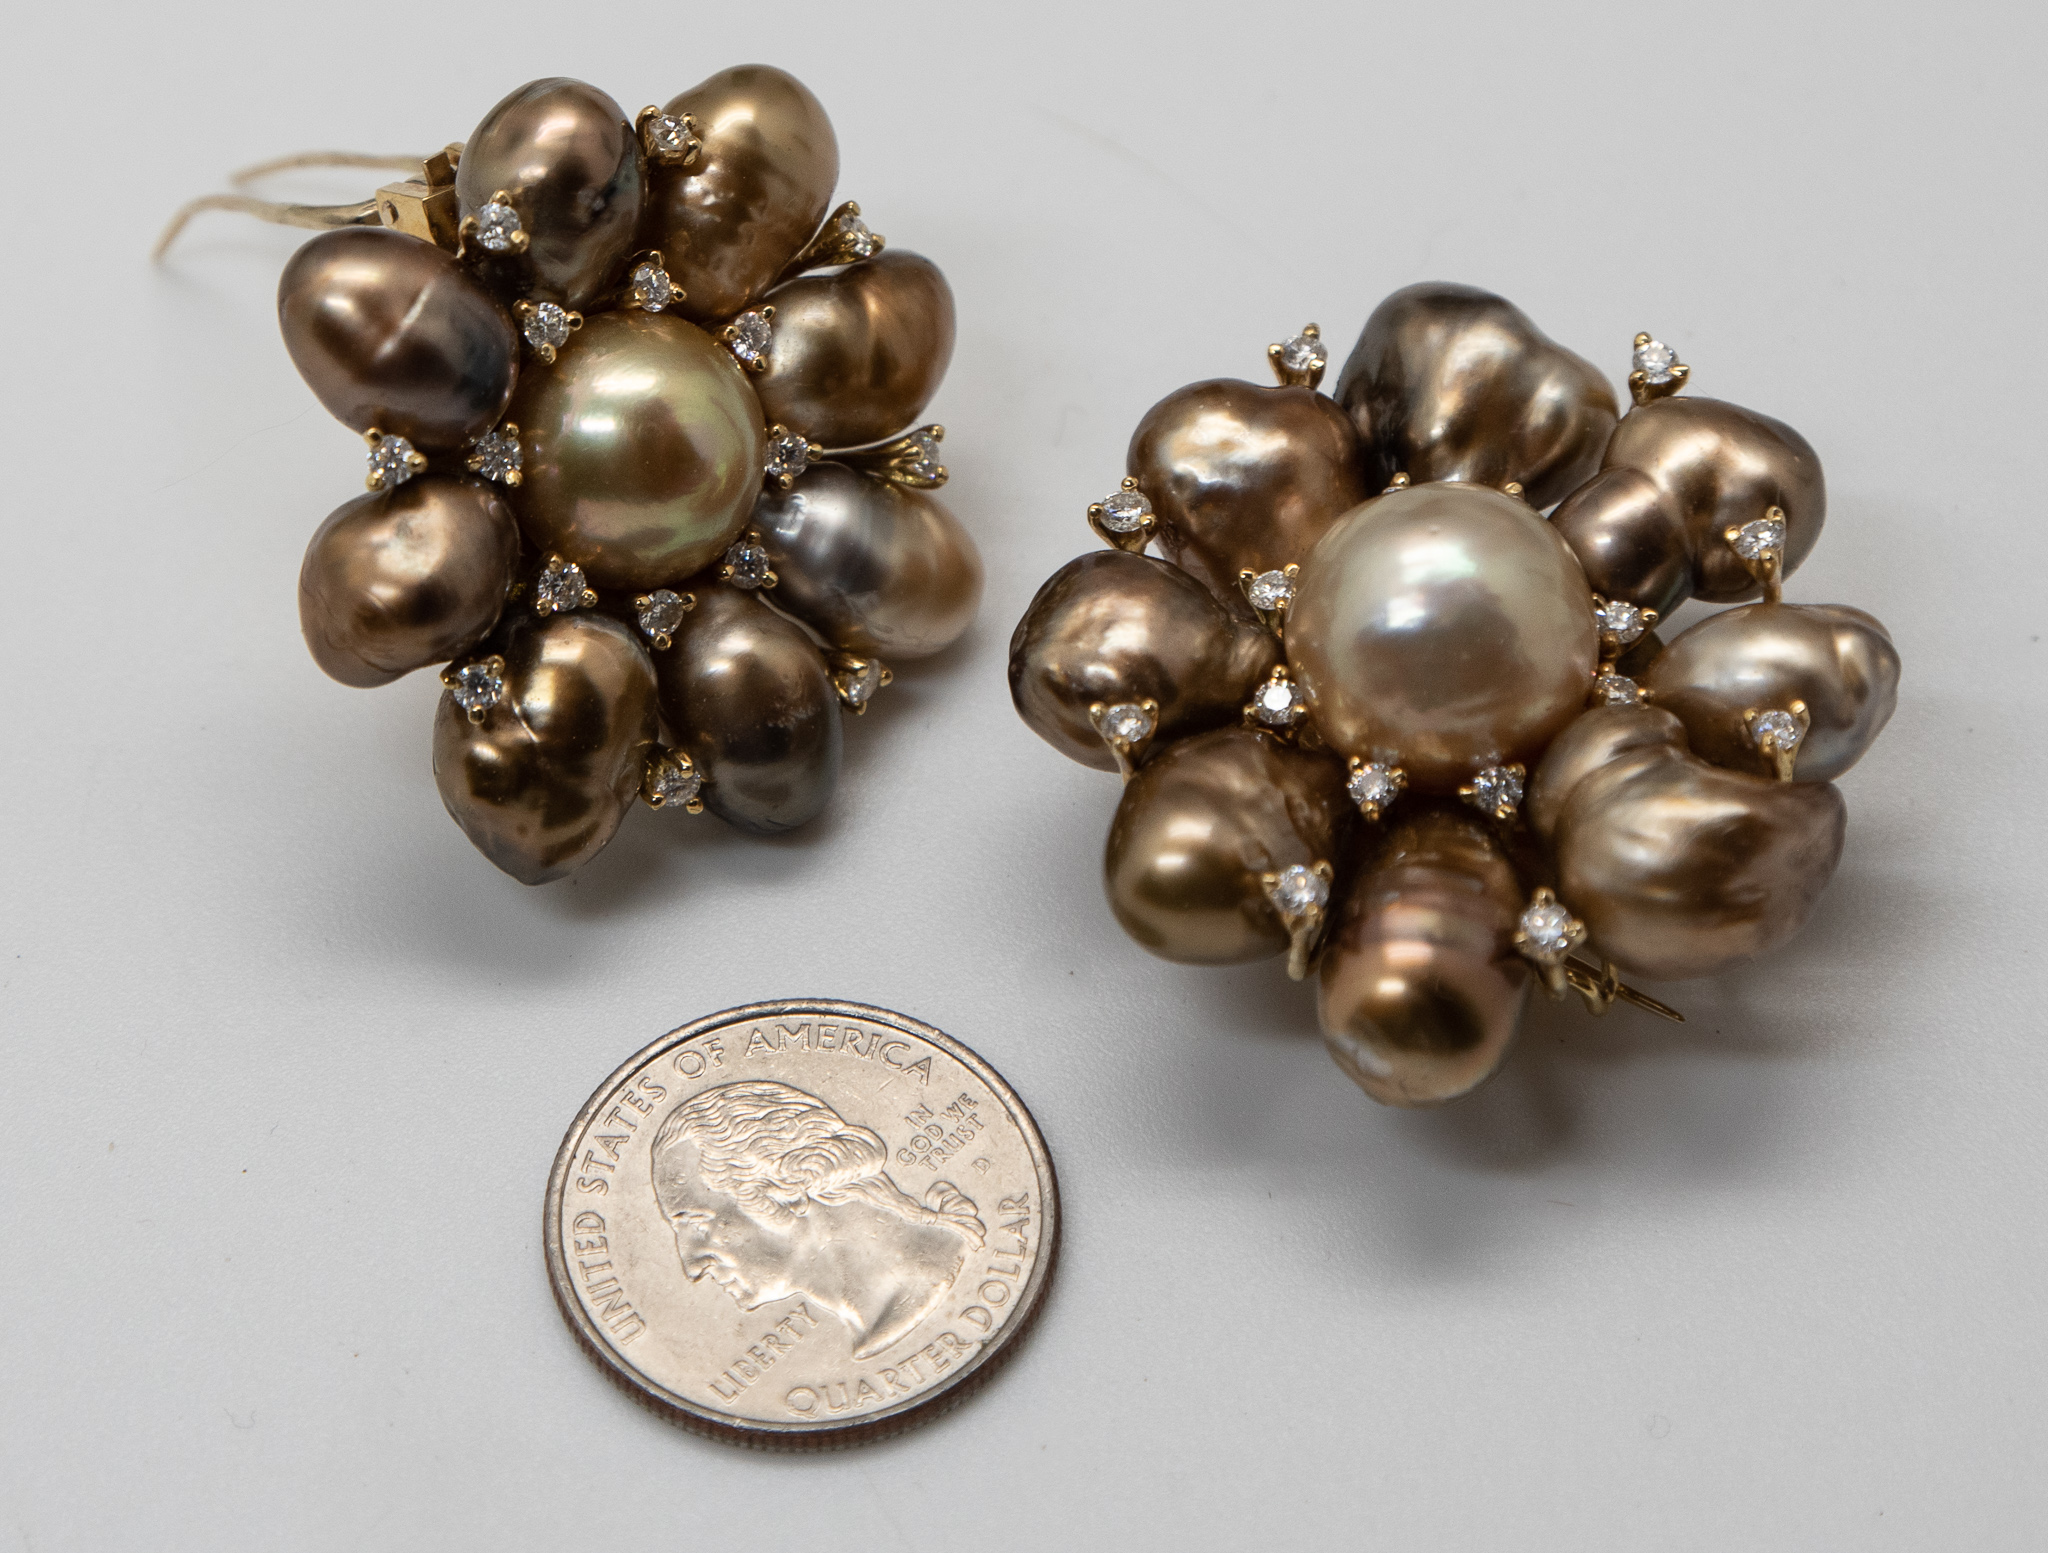 Two Tahitian pearl and diamond brooches shown US quarter coin for scale. Brooches 2 inches in diameter and 1.75 inches in diameter respectivly.